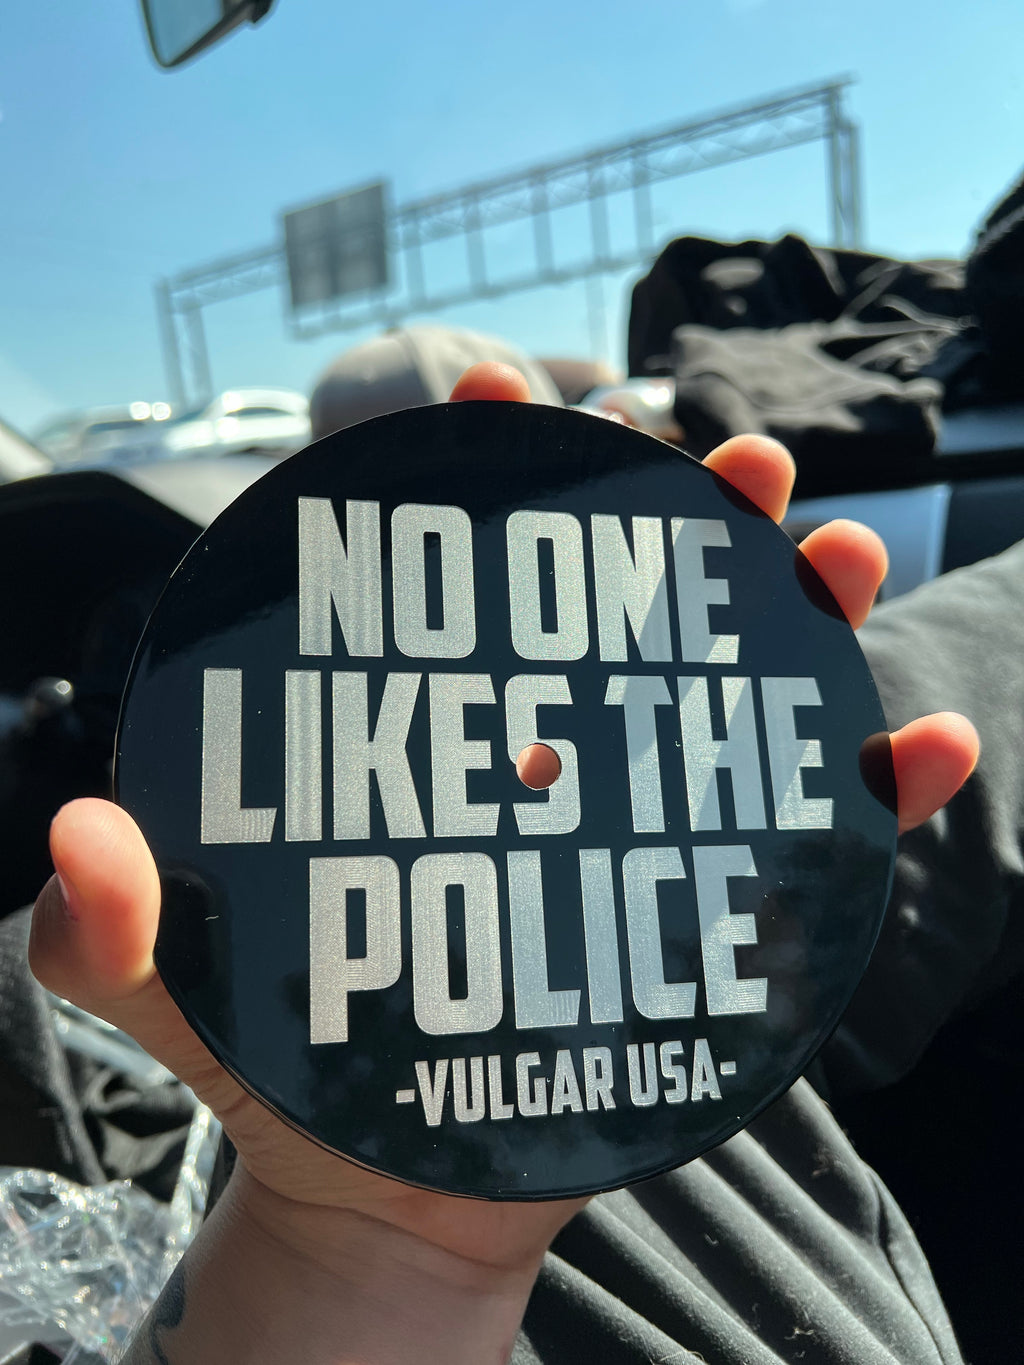 No One Like The Police Air Cleaner Cover